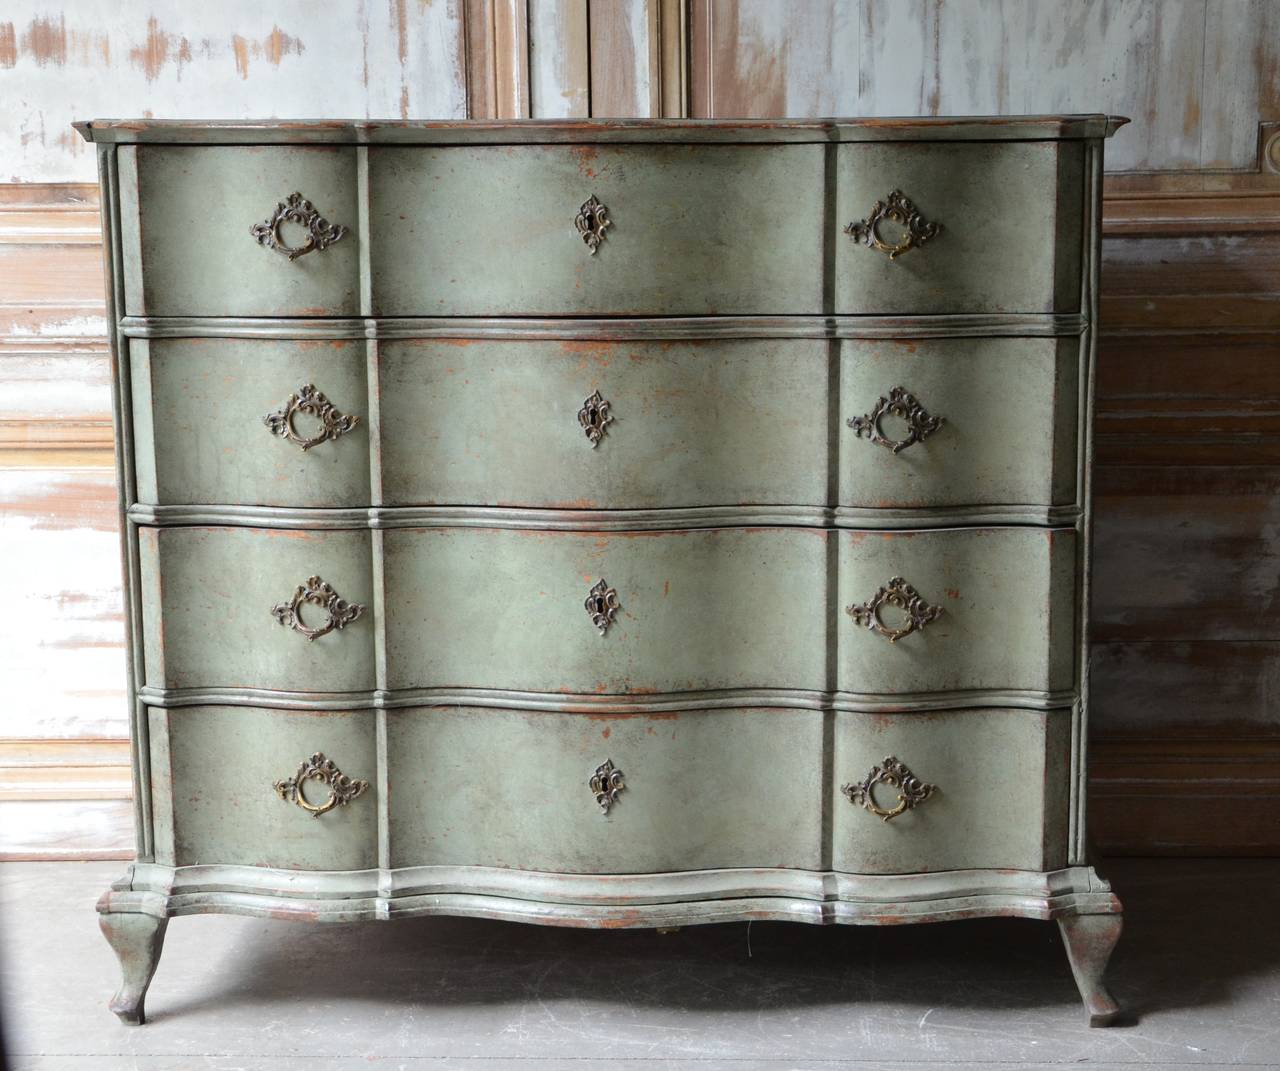 An exquisite and richly carved serpentine fronted late Baroque Swedish chest with rare double serpentine moldings on the drawers on stands and beautiful original brass hardwares, in greenish patina. Sweden, circa 1750.